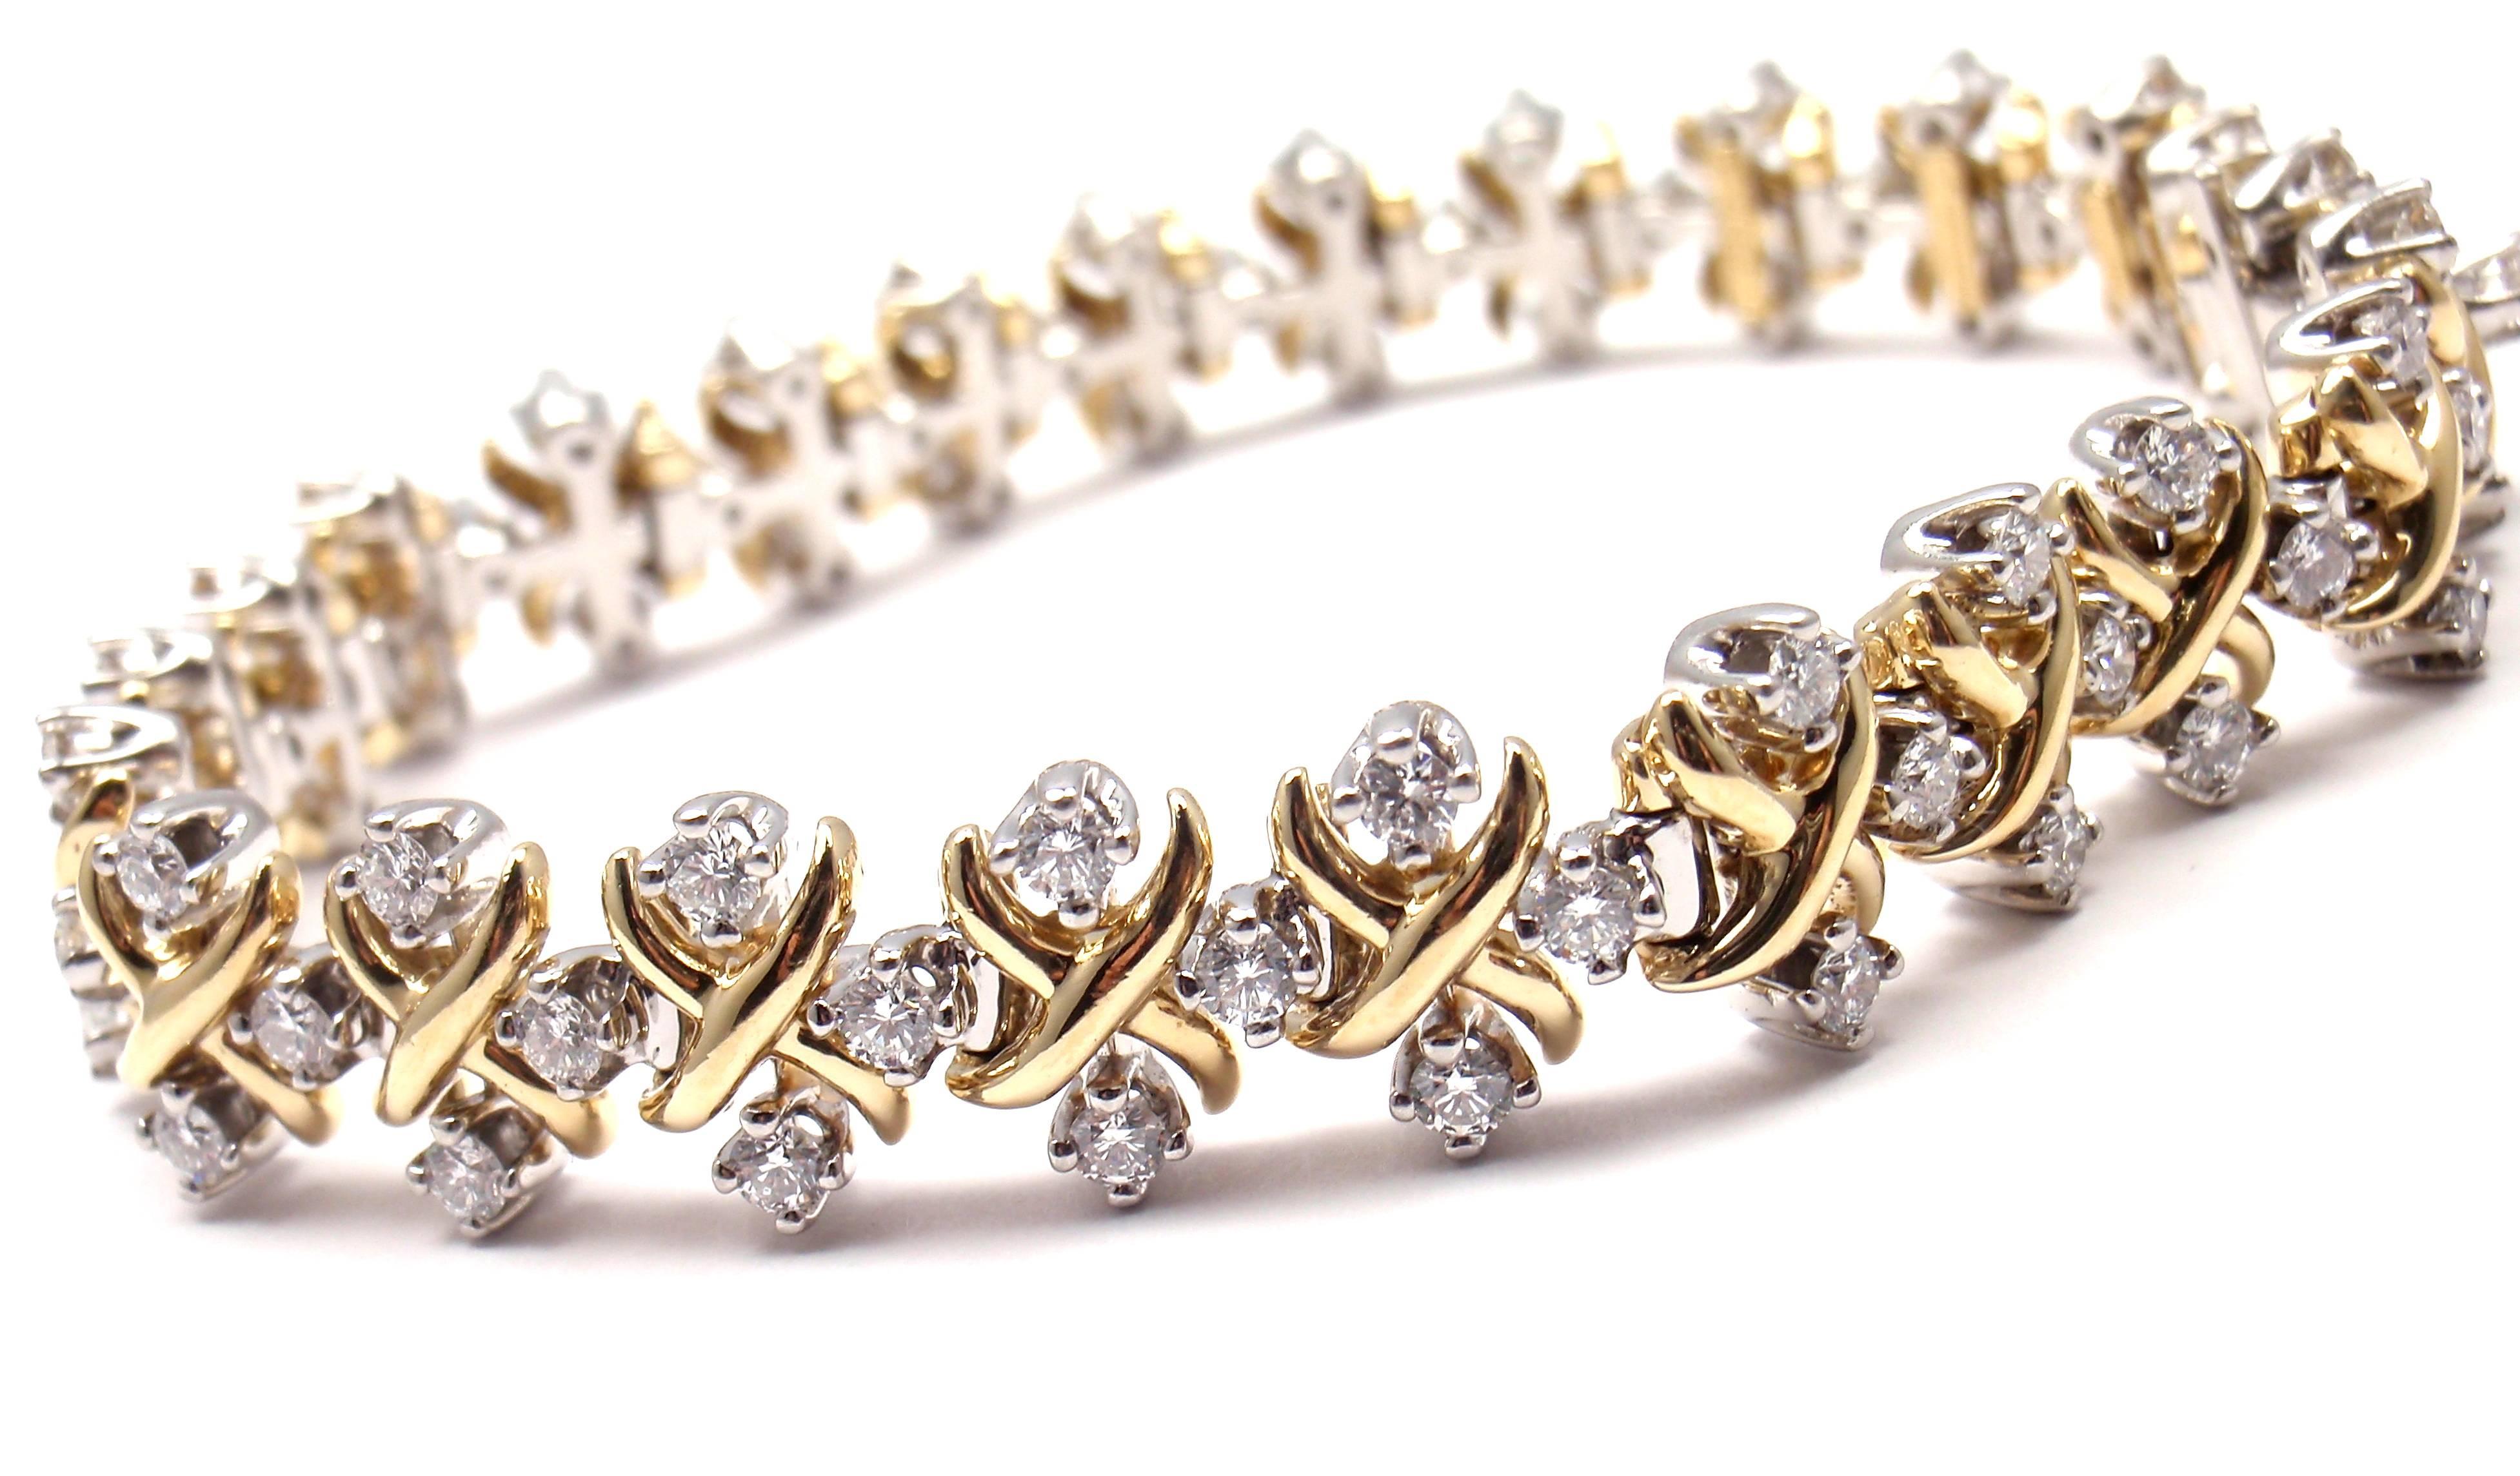 18k Yellow Gold & Platinum Diamond Lynn Bracelet by Jean Schlumberger for Tiffany & Co. 
With 75 round brilliant cut diamonds VS1 clarity,
E color 
Total weight approximately 2.68ct
This bracelet comes with Tiffany & Co box.

Details: